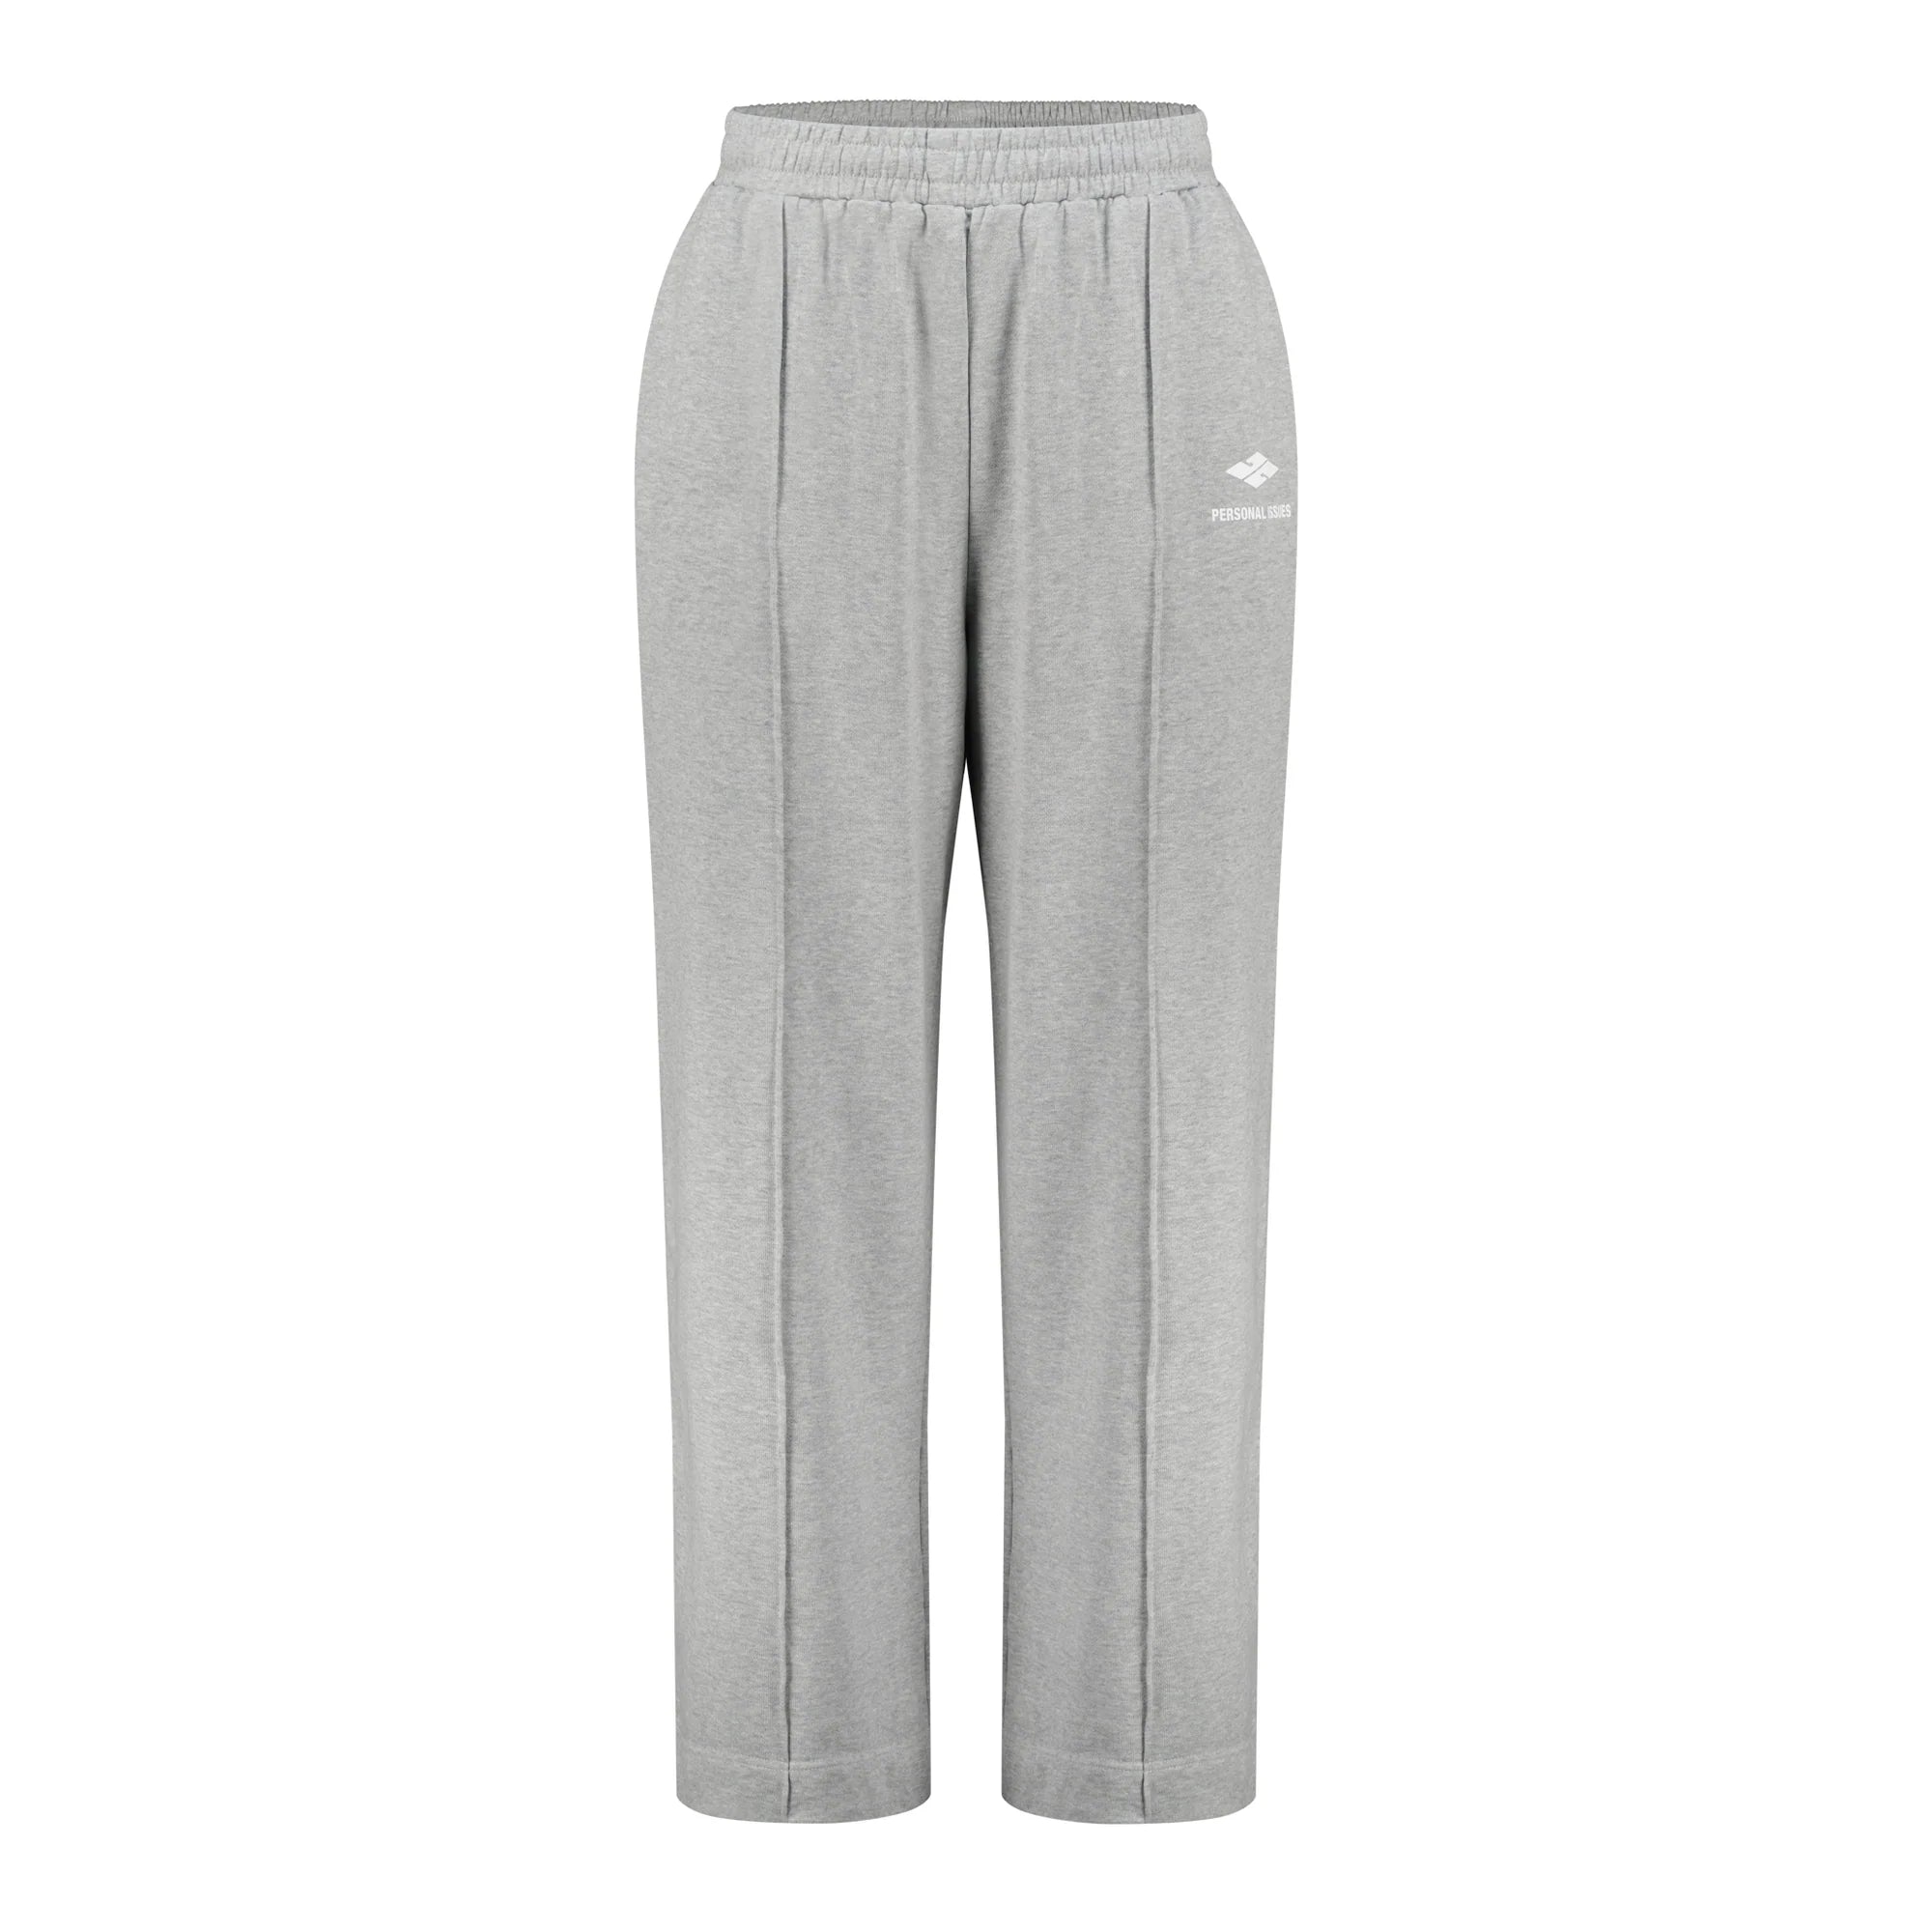 Personal Issues Oversized Sweatpants - Light Grey